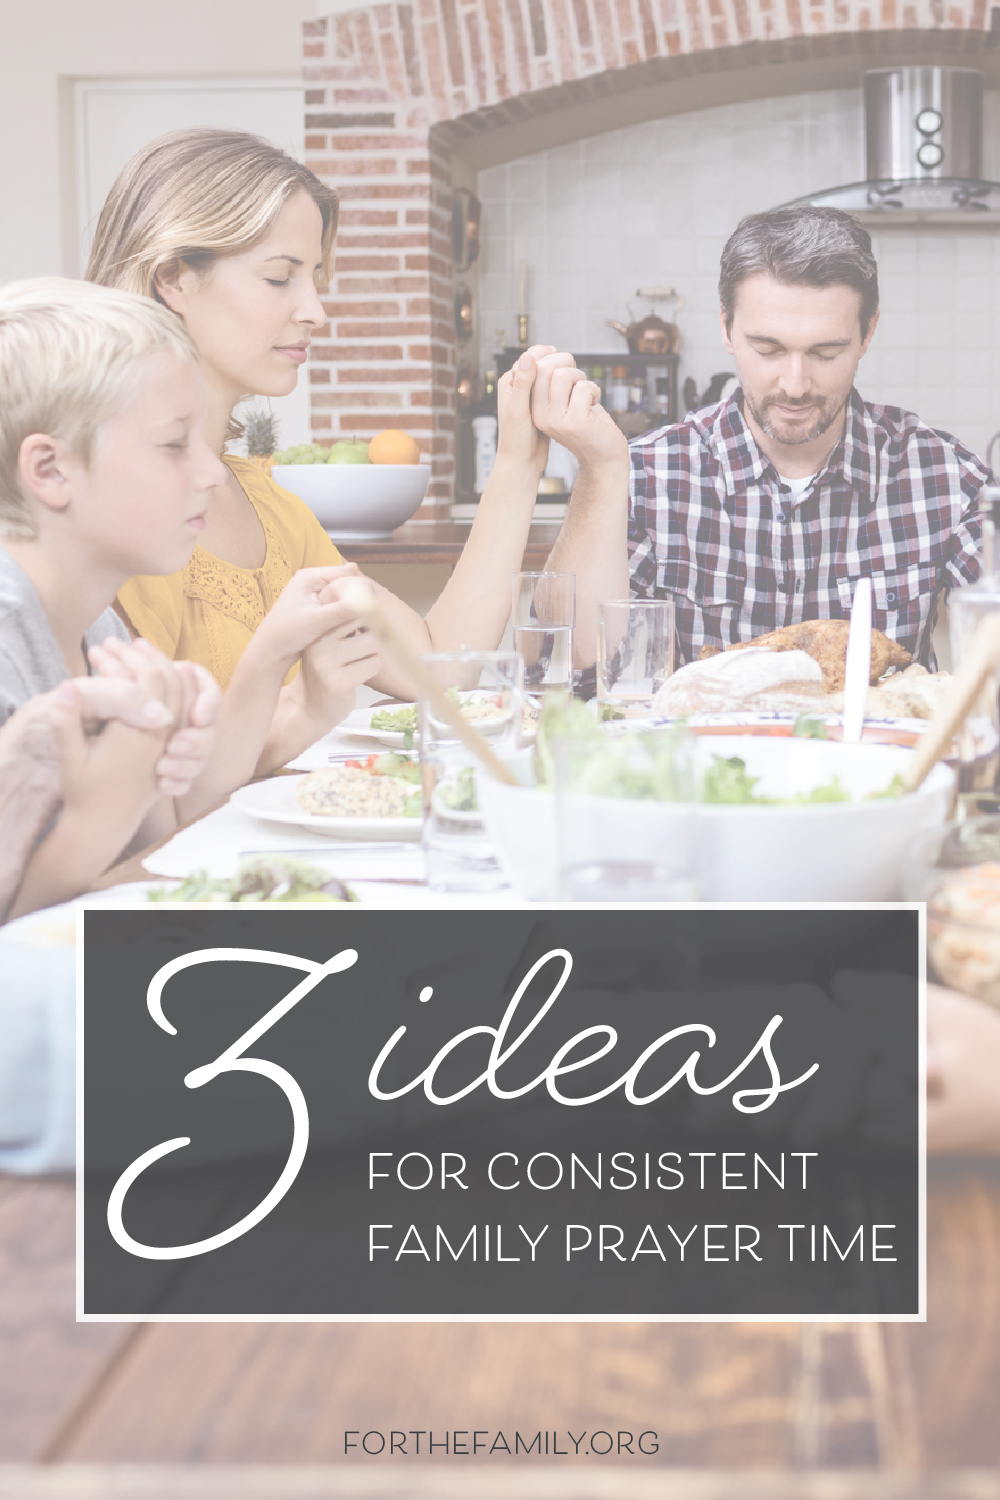 3 Ideas for Consistent Family Prayer Time